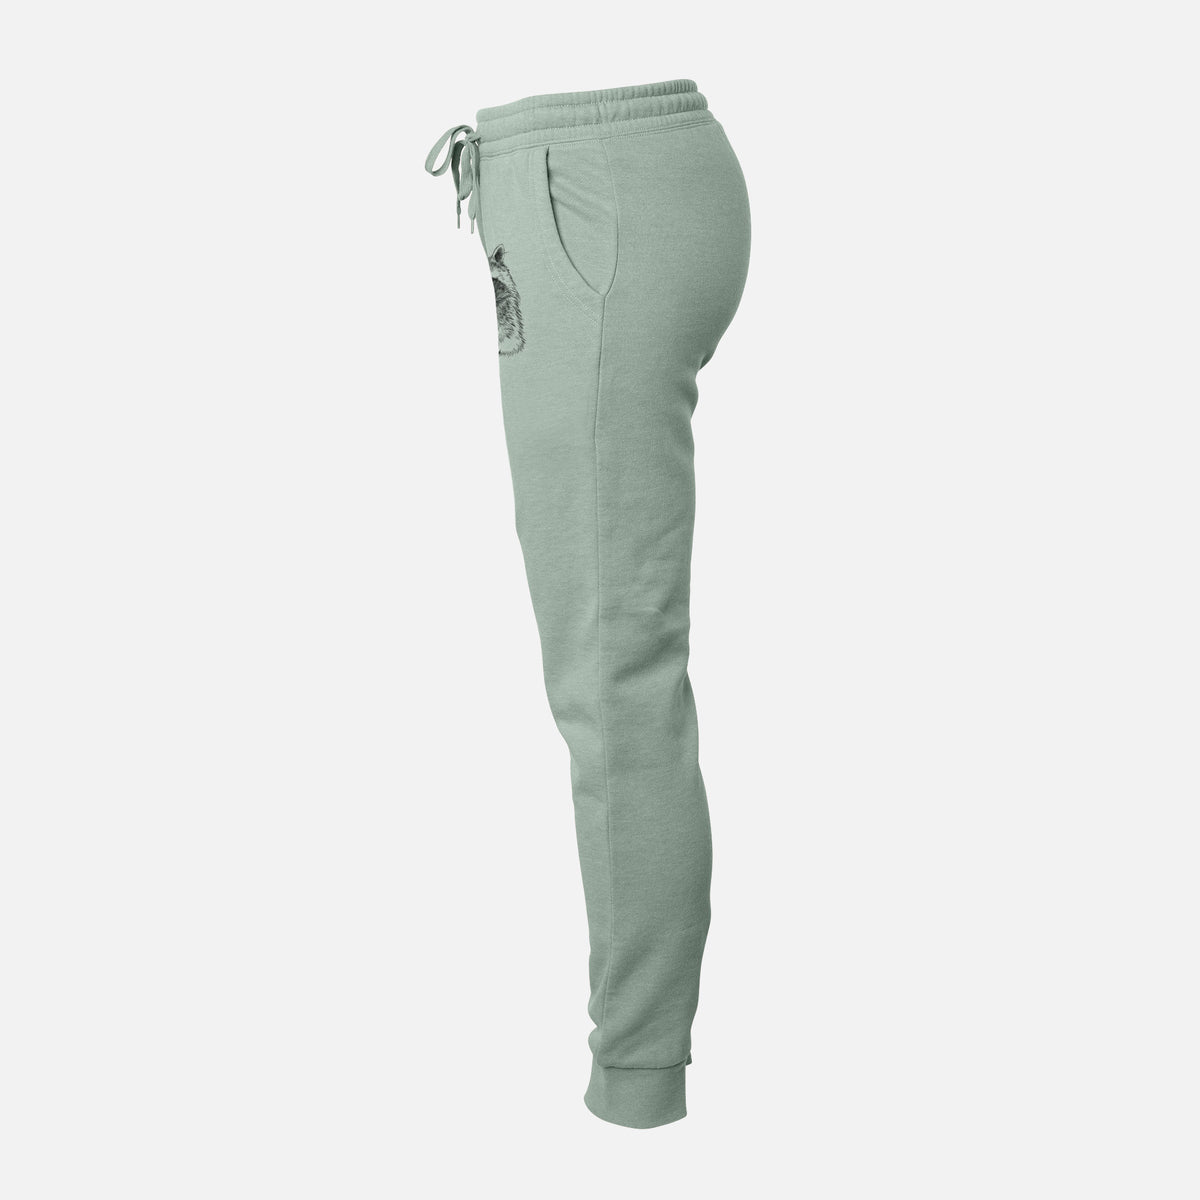 Protect our Forests - Preserve Old Growth - Women&#39;s Cali Wave Jogger Sweatpants